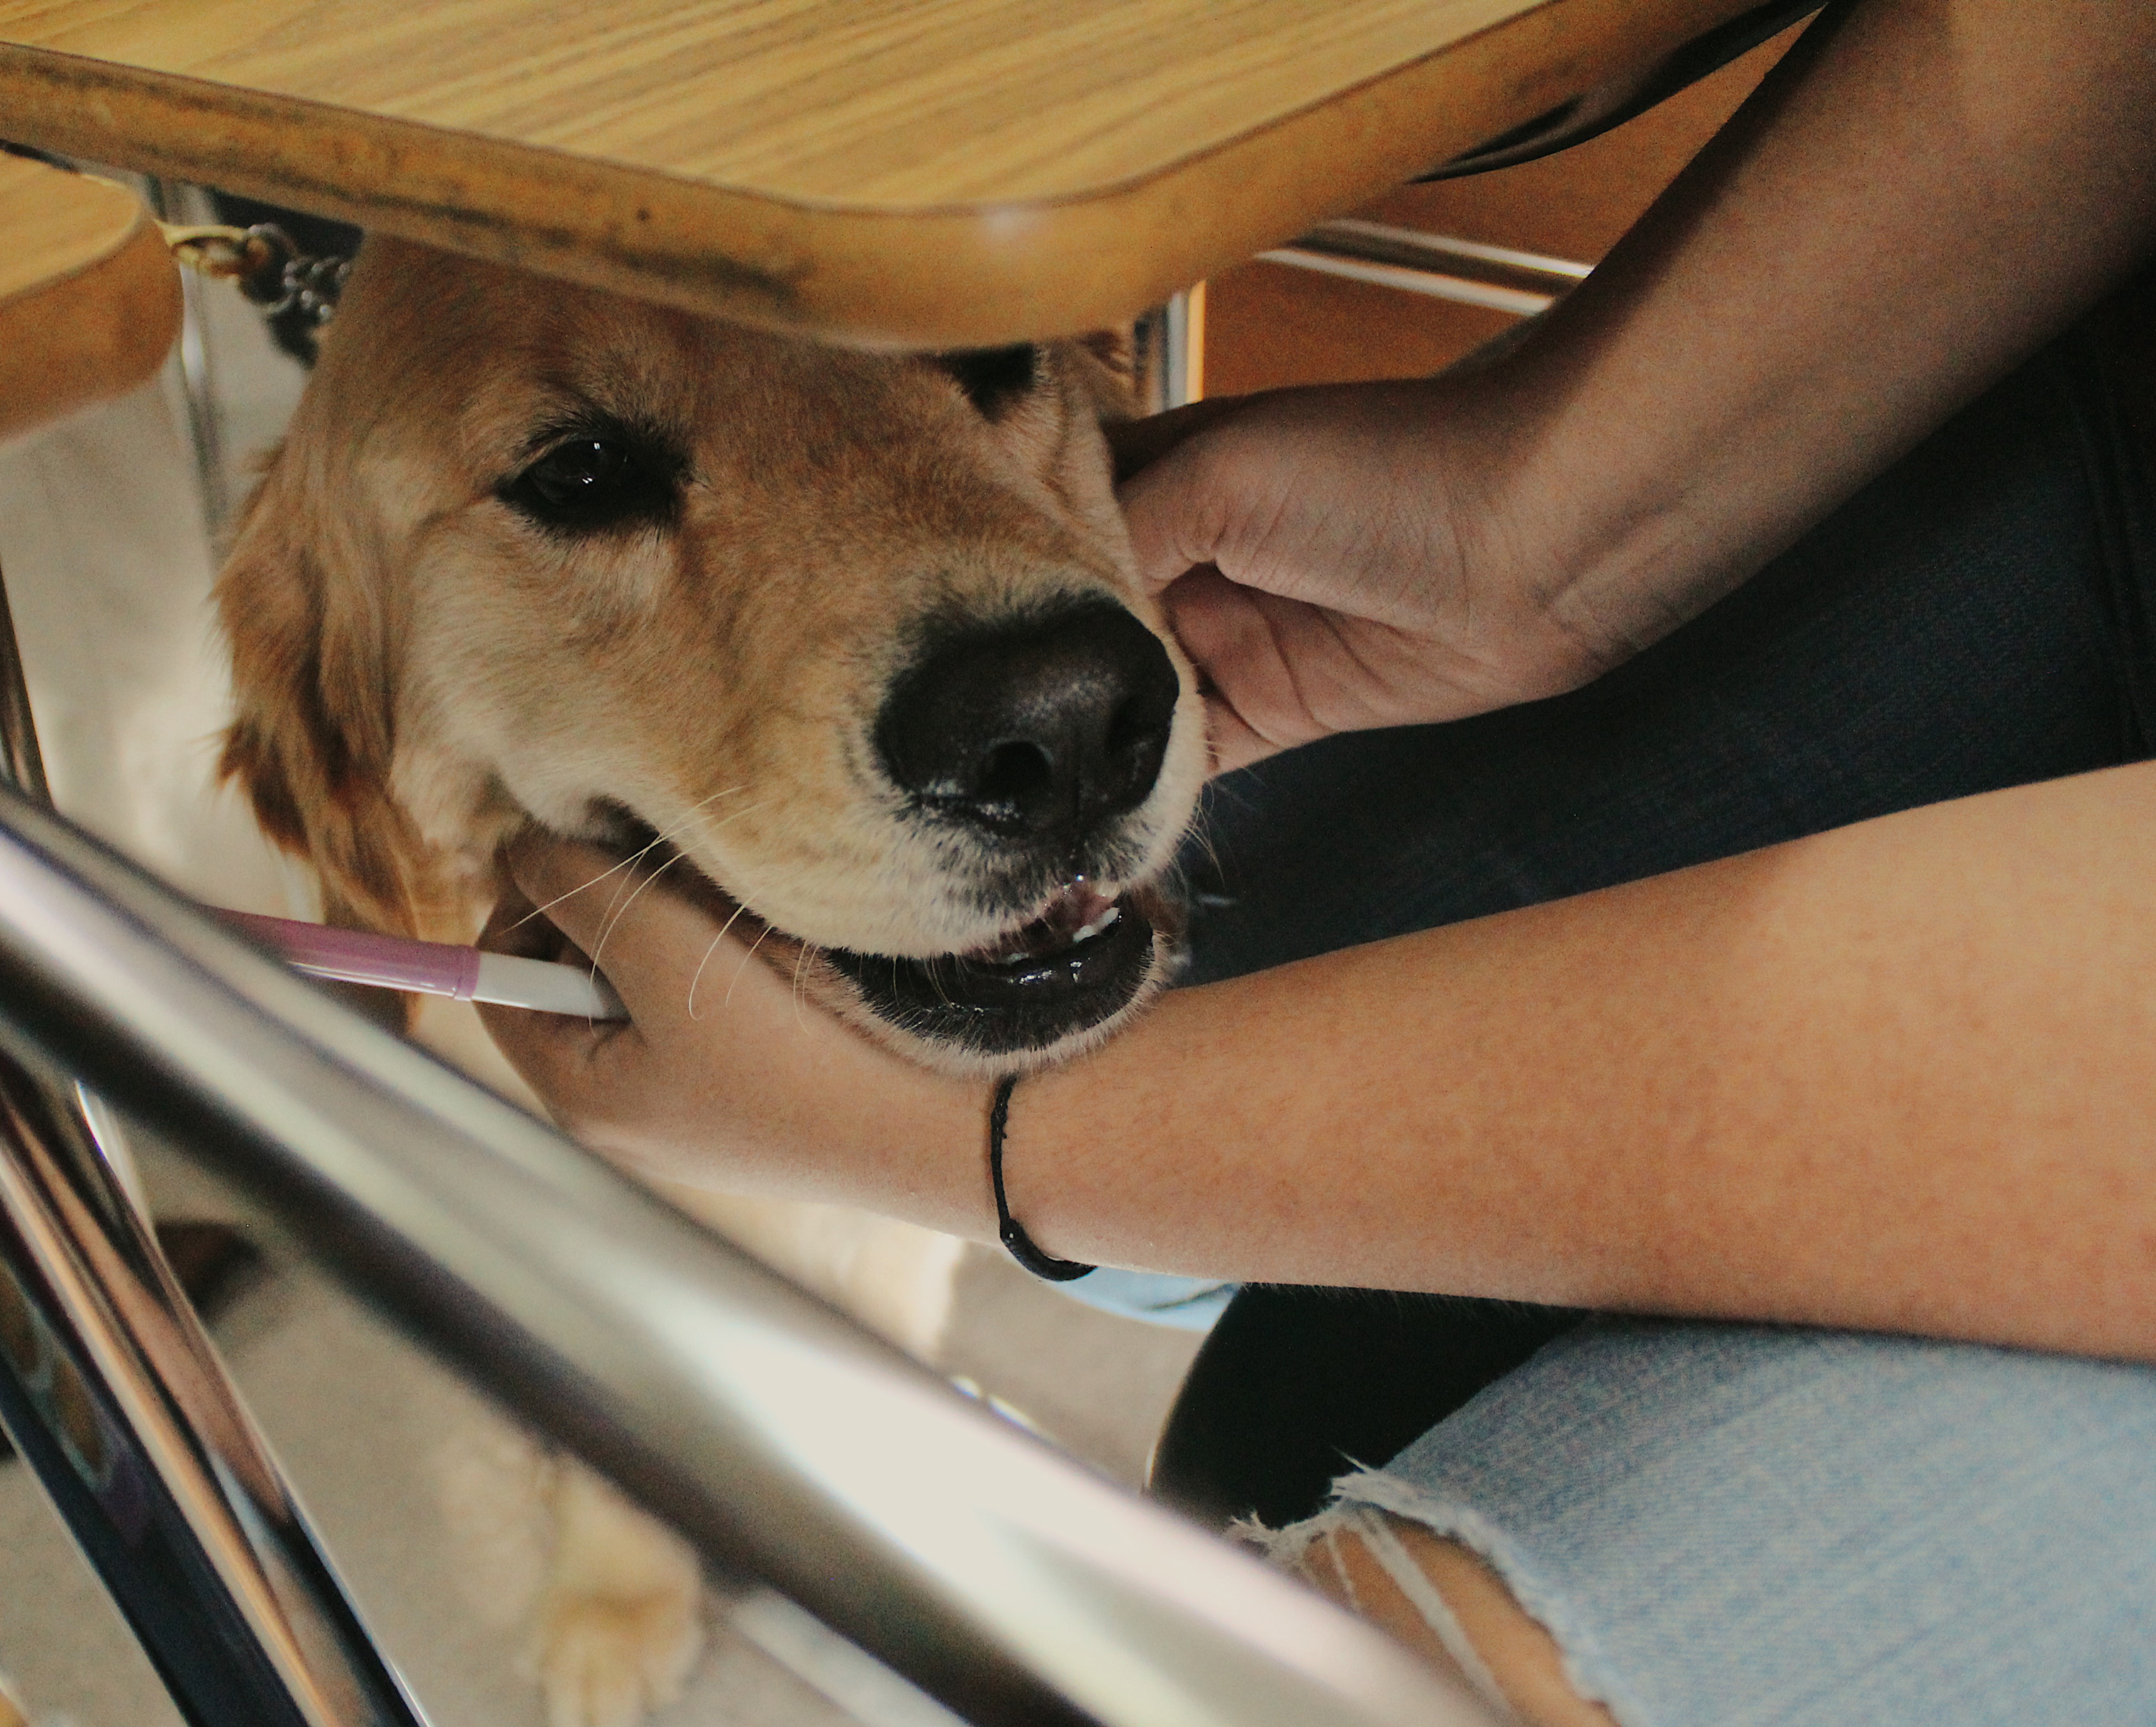 After the school reopened, comfort dogs—like this one named Jacob—were brought in for the students. (Rain Valladares)